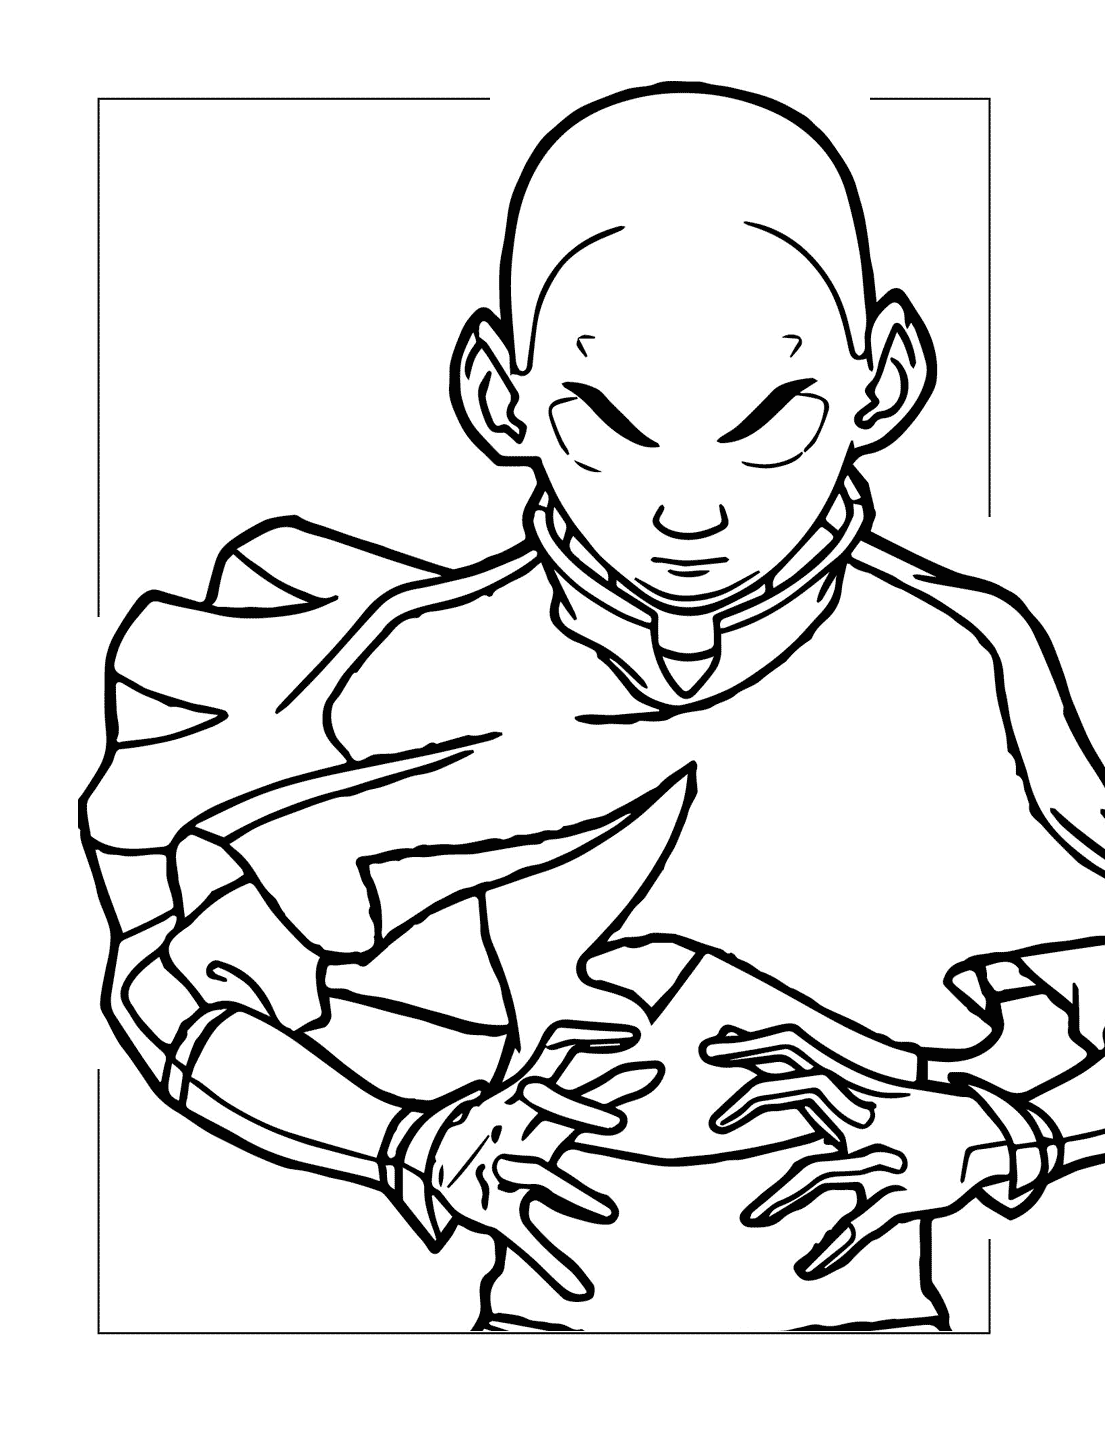 Aang In Avatar State Coloring Page